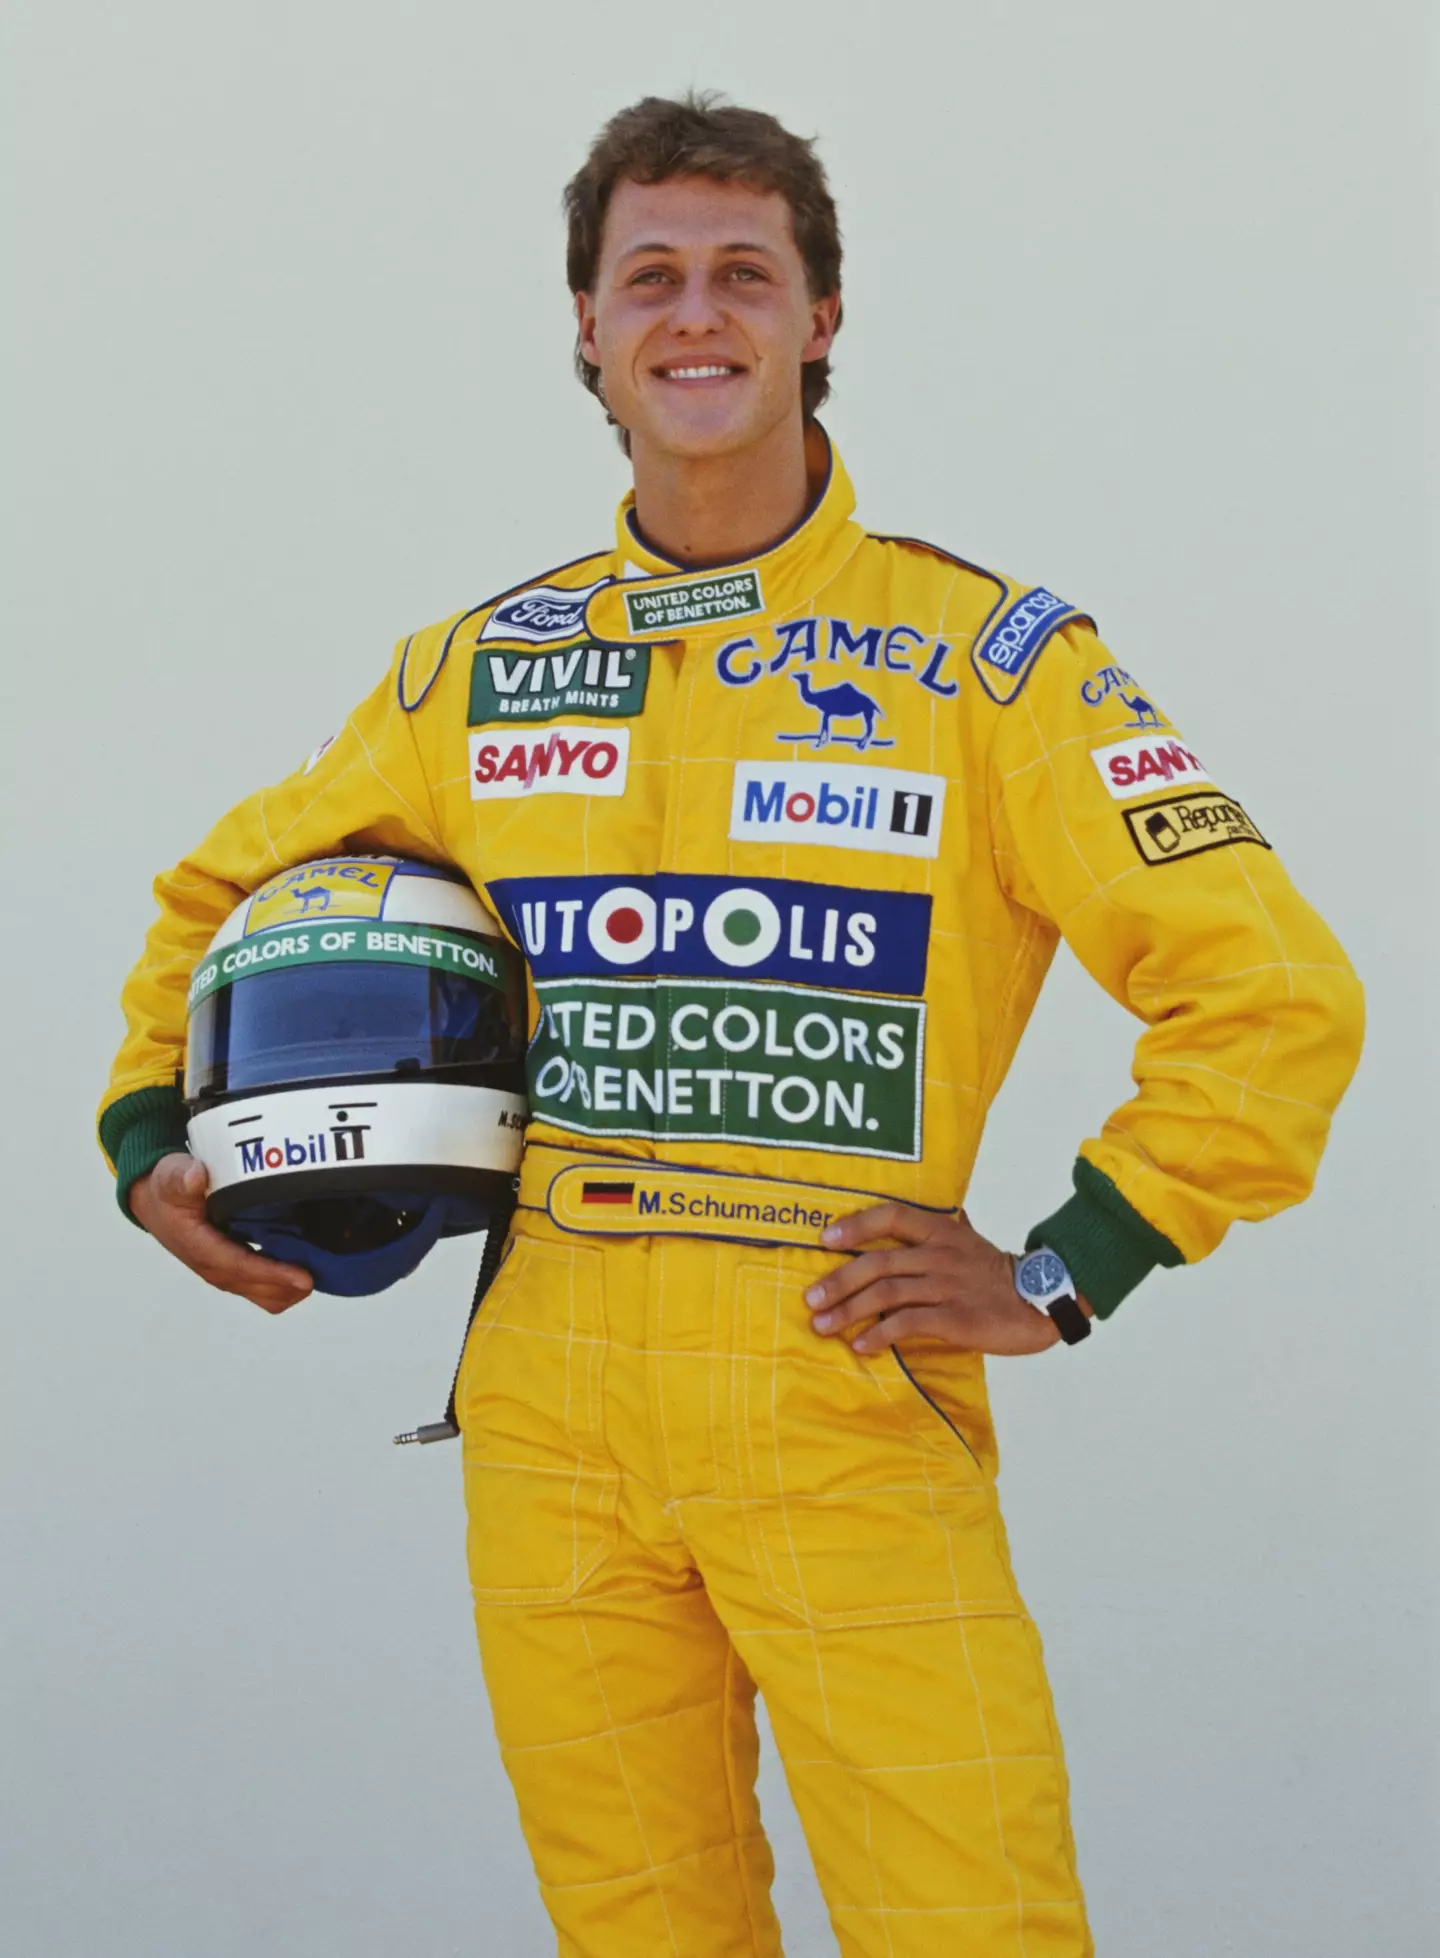 Michael Schumacher at Yellow Pages South African Grand Prix in 1992.